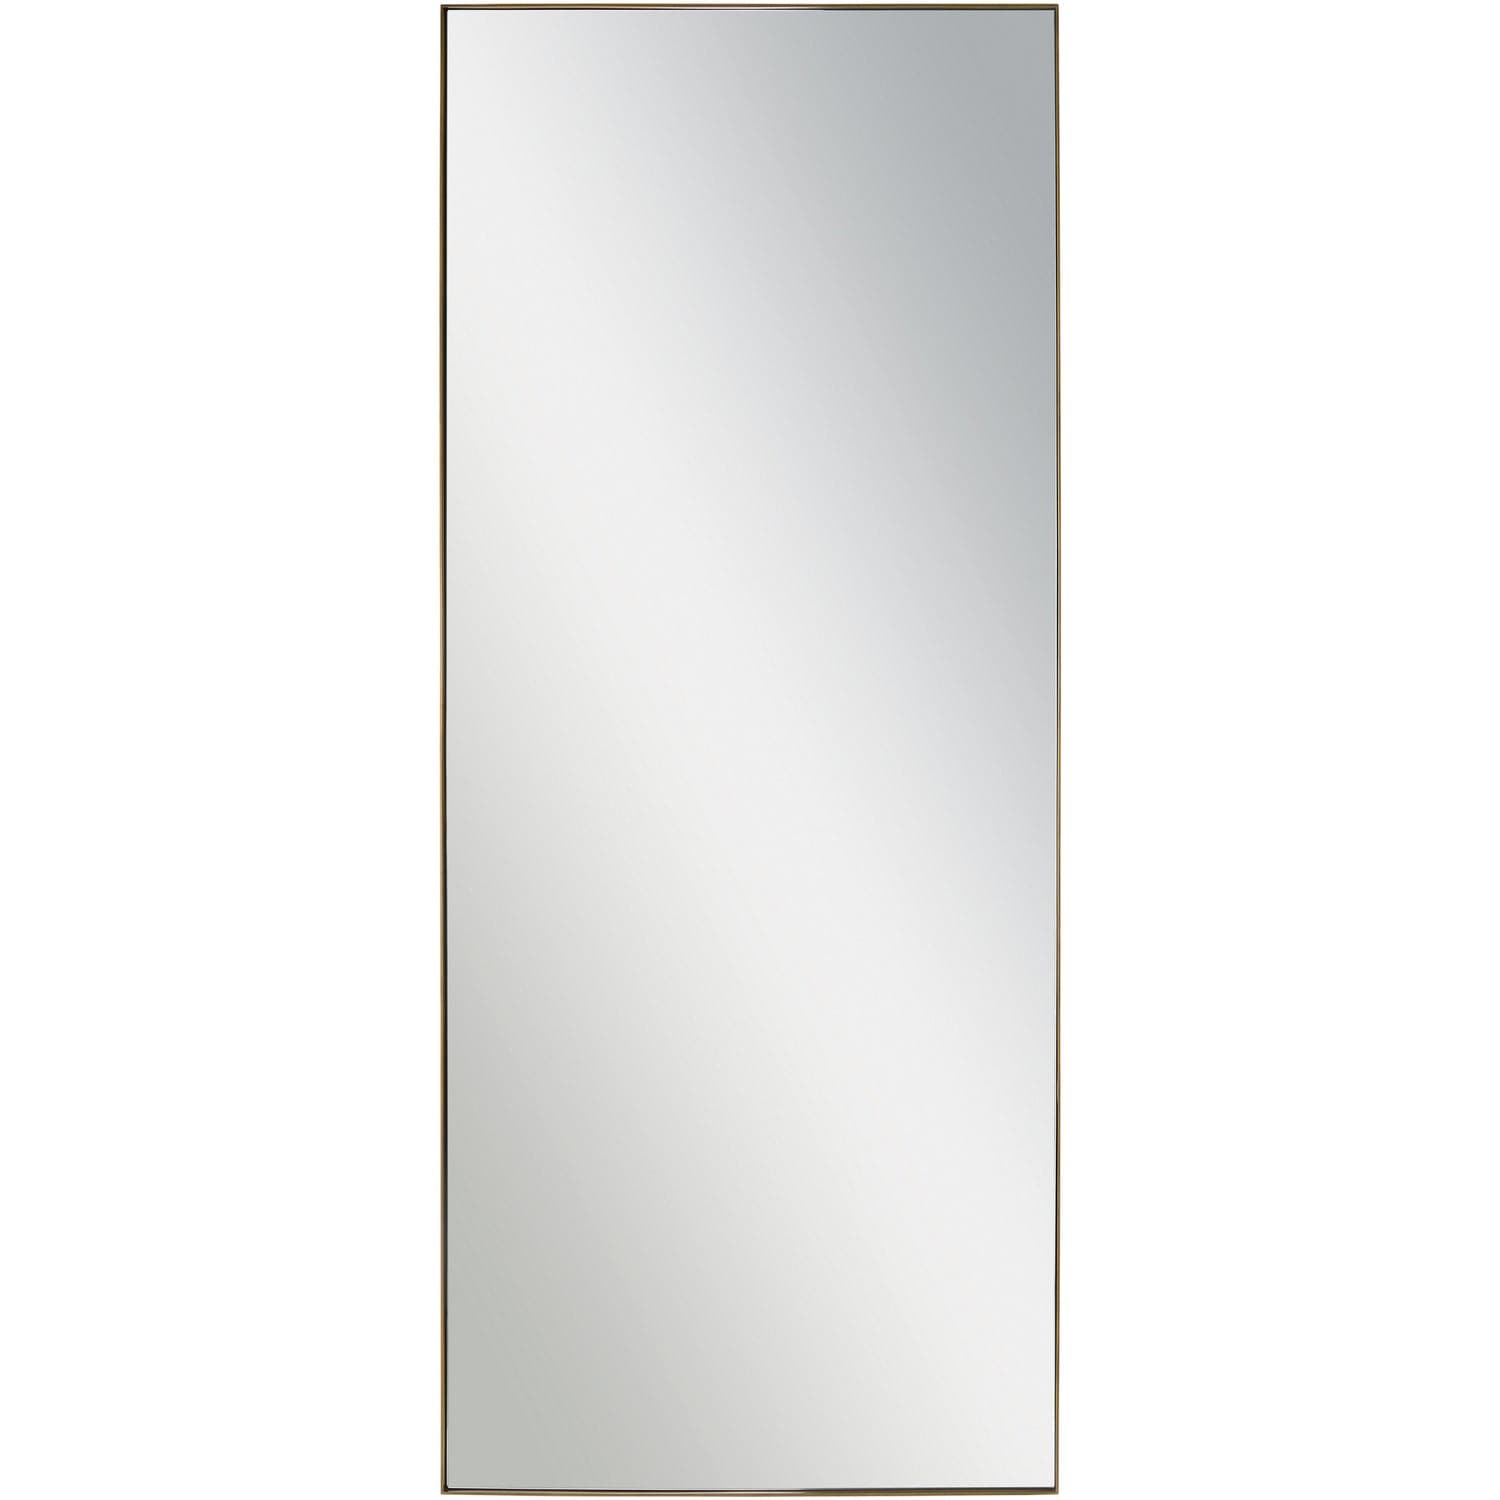 Renwil - MT2358 - Mirrors/Pictures - Mirrors-Rect./Sq.